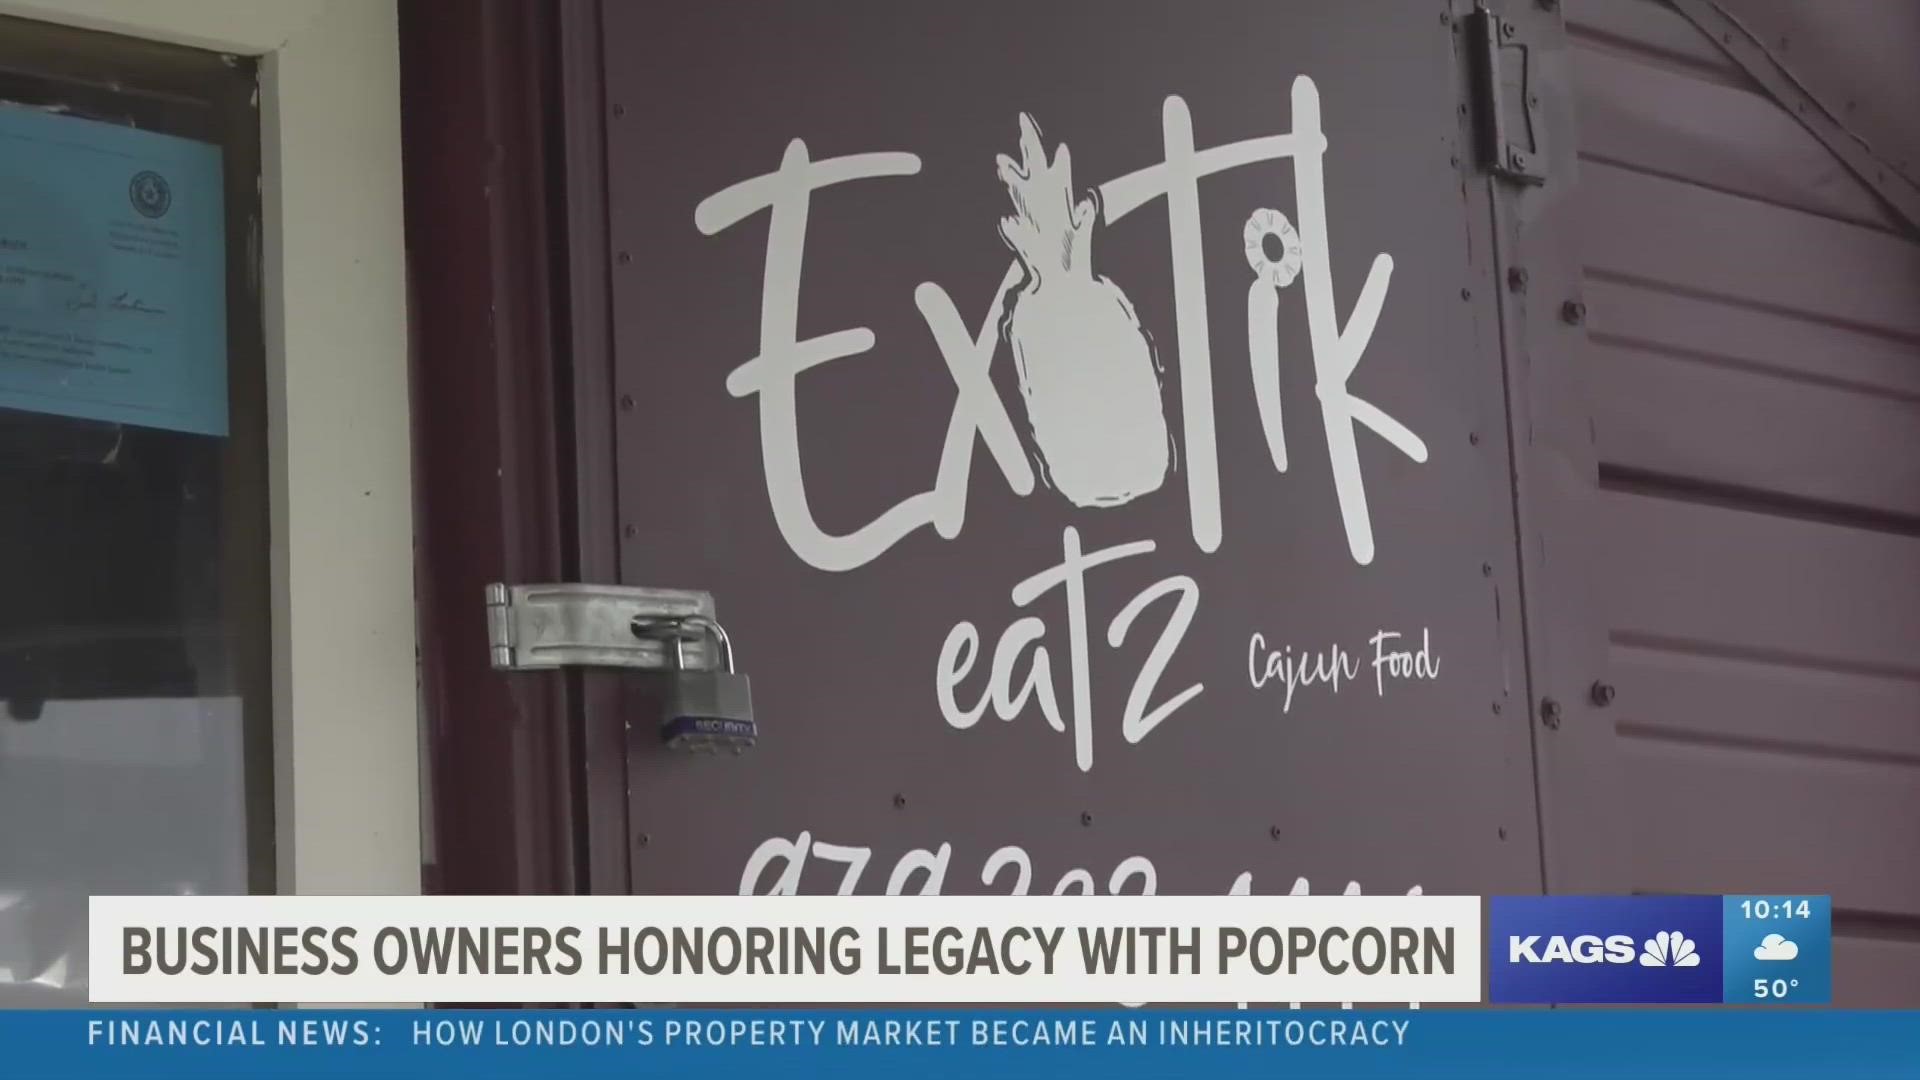 Brian Bisor and Andre Rashad, the co-owners of Exotik Eatz in College Station, are honoring a legacy championed by their grandmother and great grandmother.